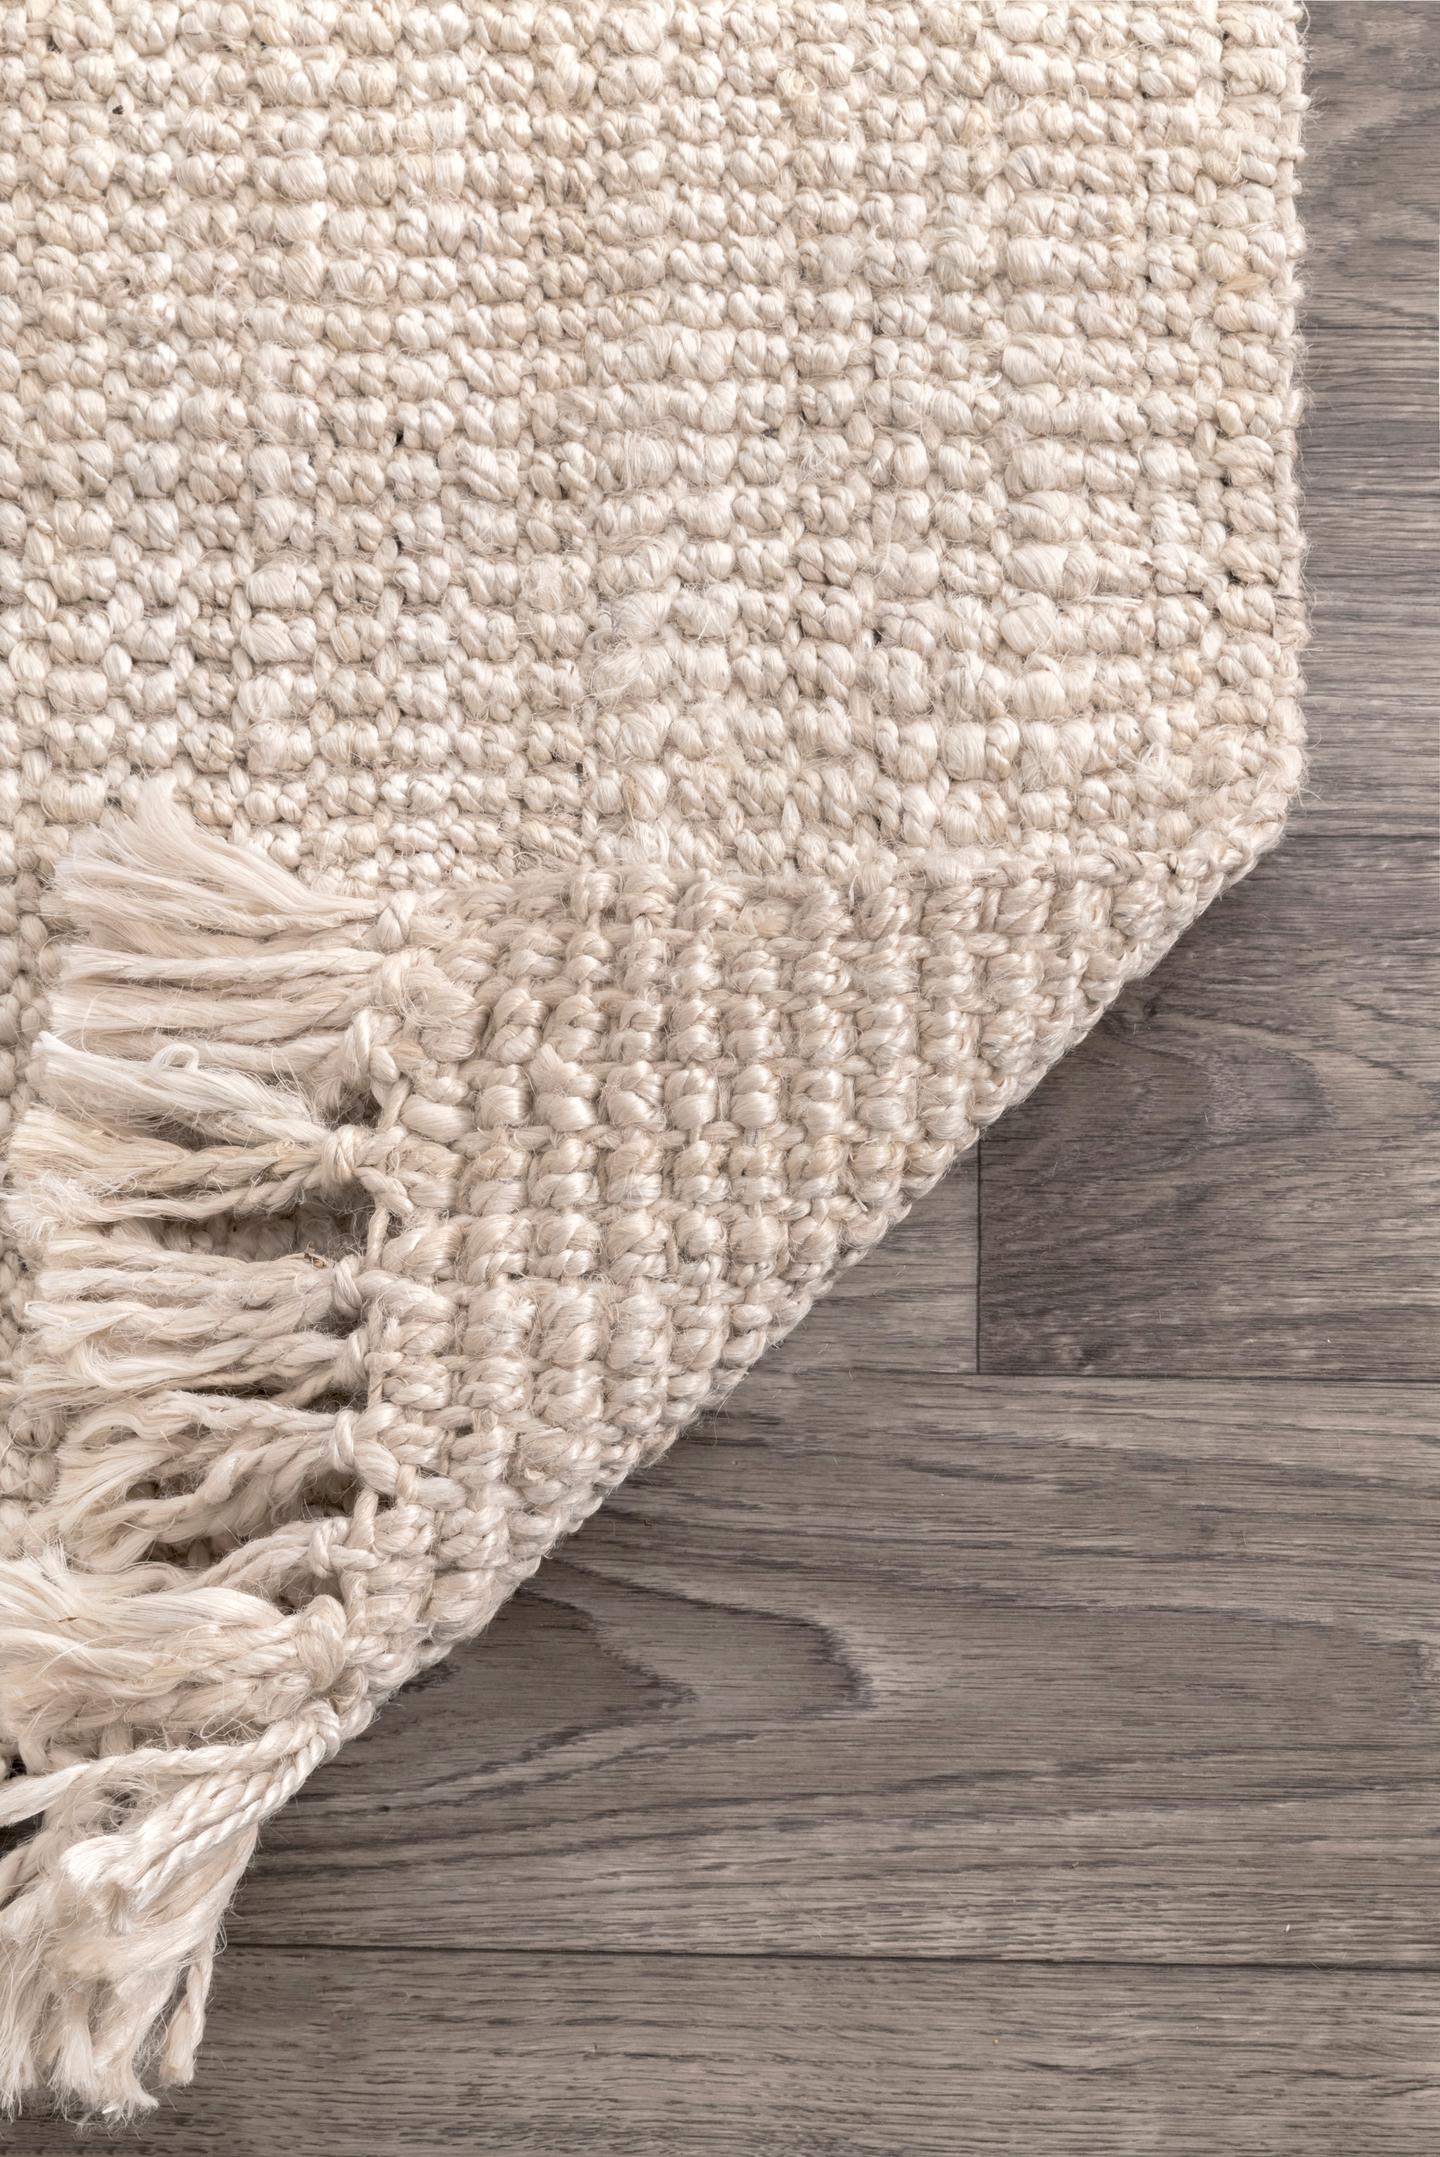 Hand Woven Chunky Loop Jute Area Rug, 9'6" x 11'6", Off White - Image 2